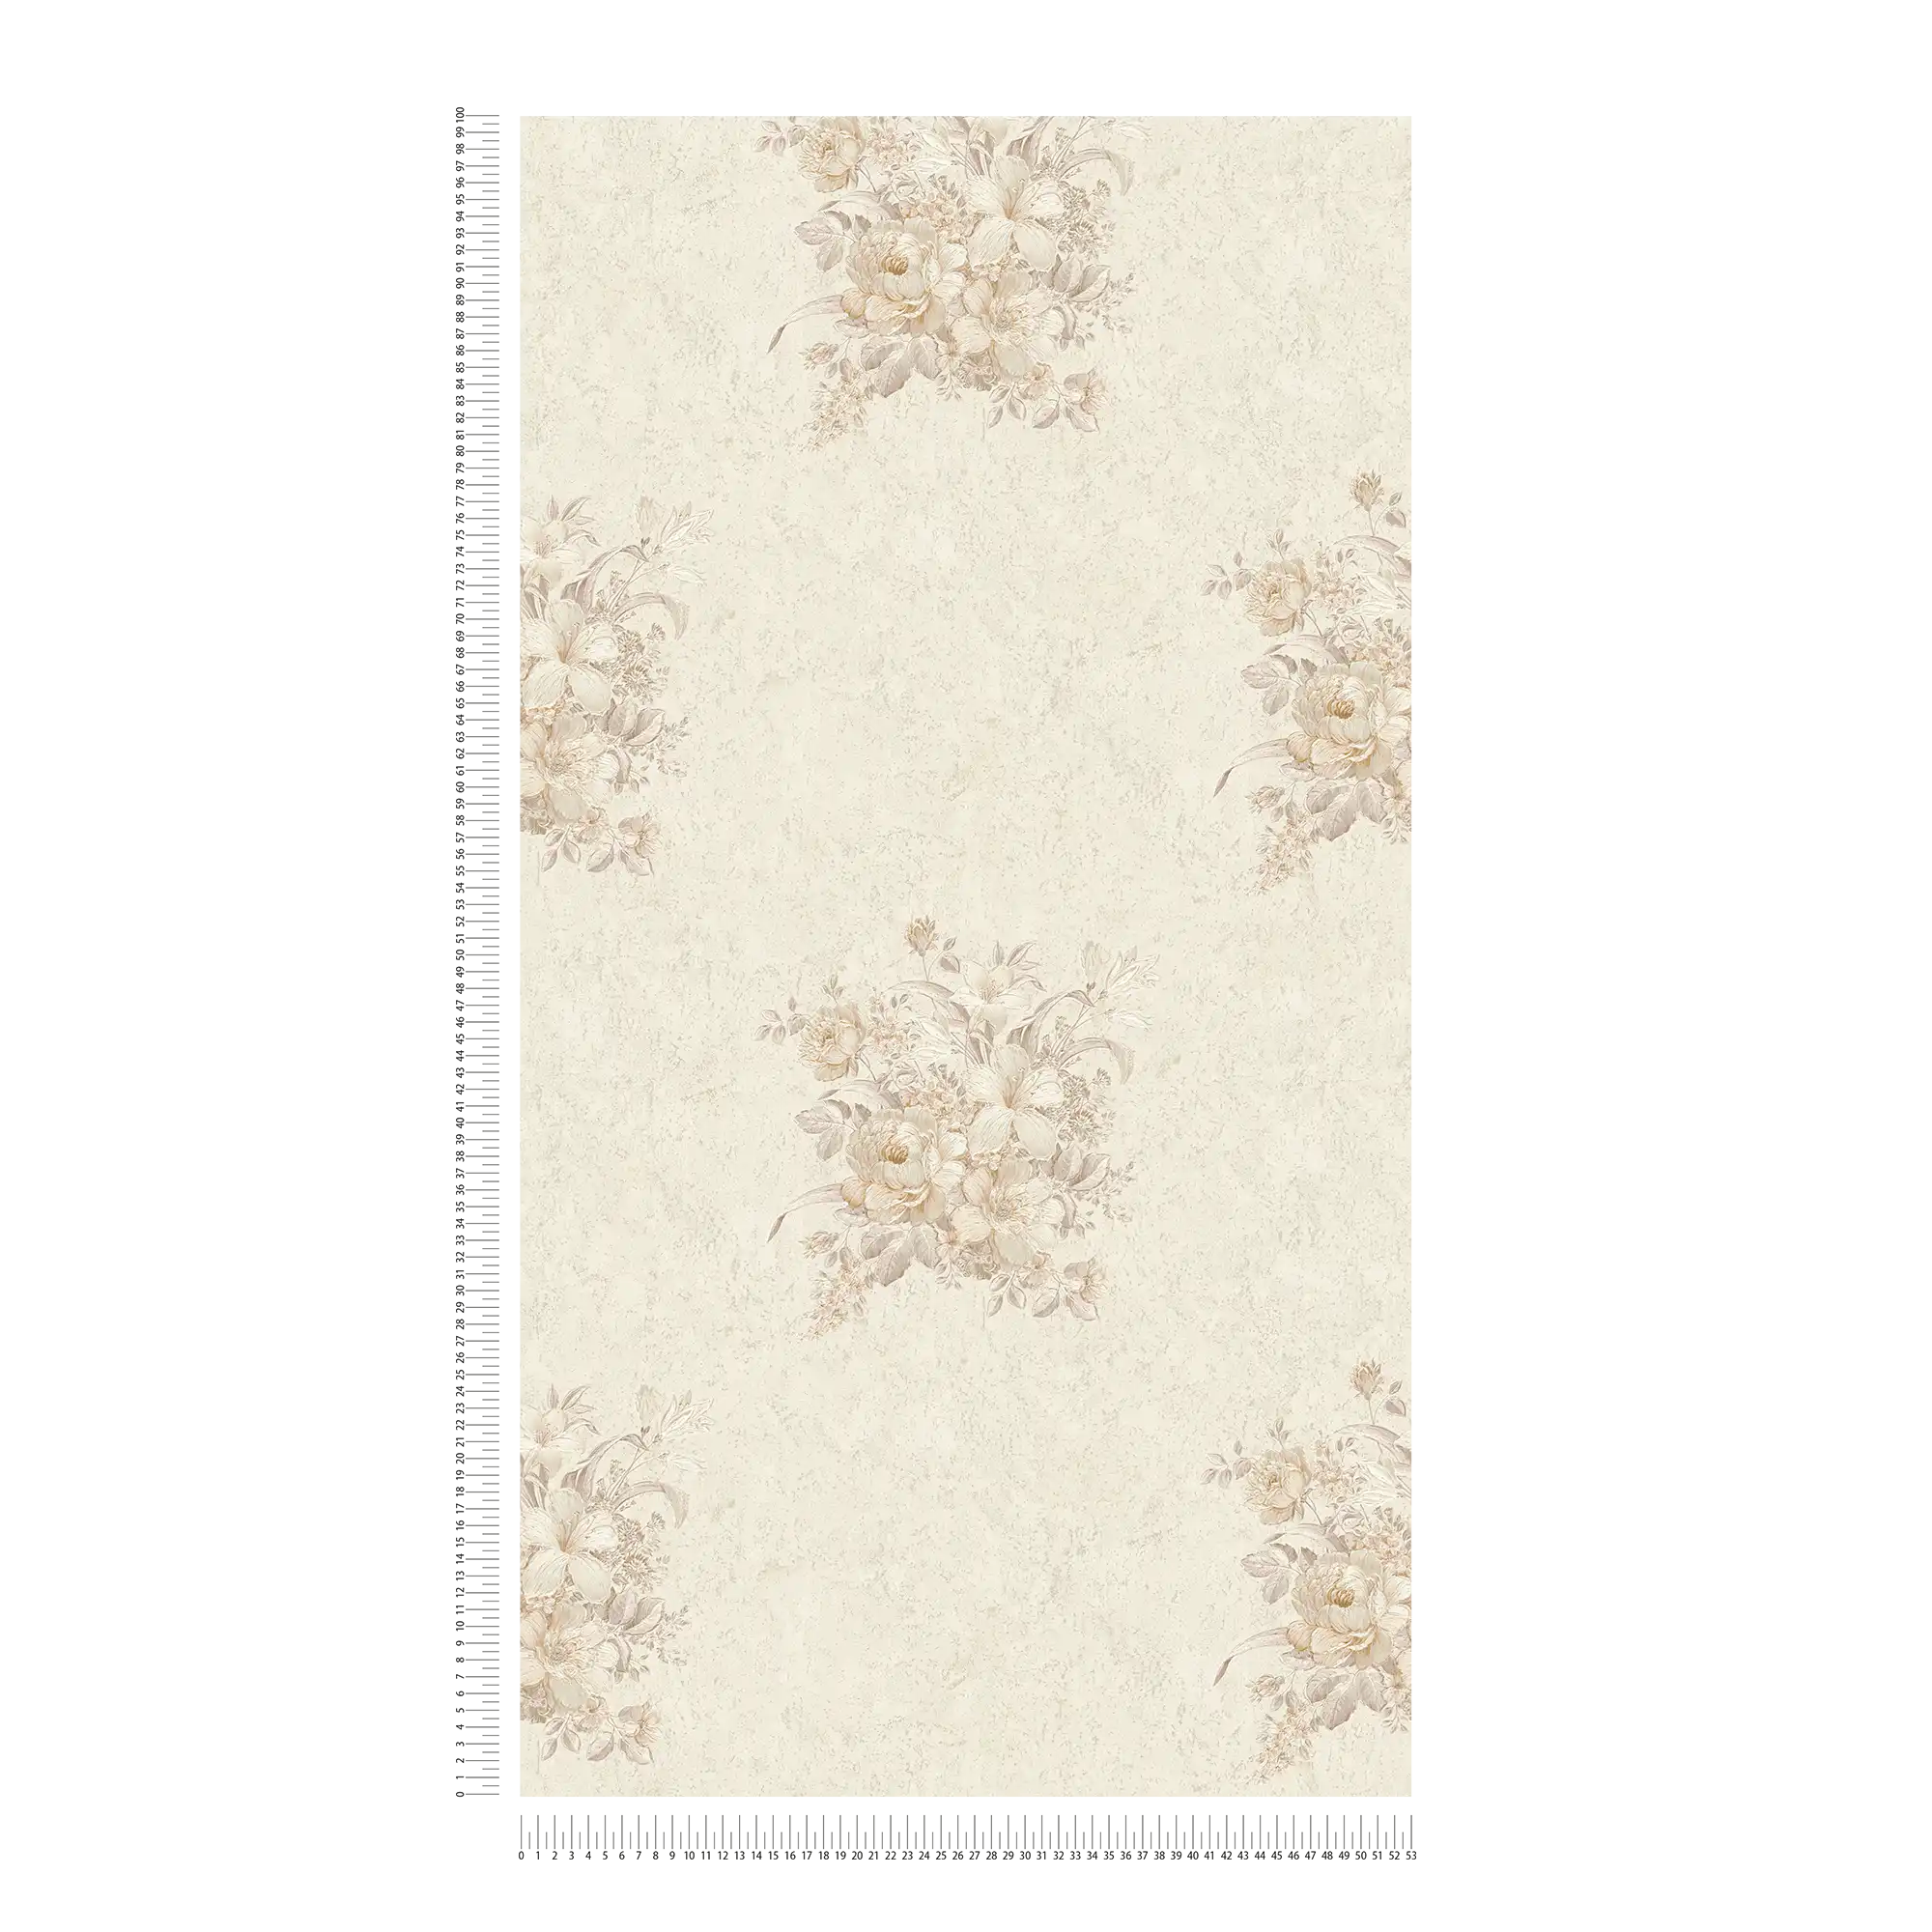             Flowers wallpaper with ornaments, textured - beige, cream
        